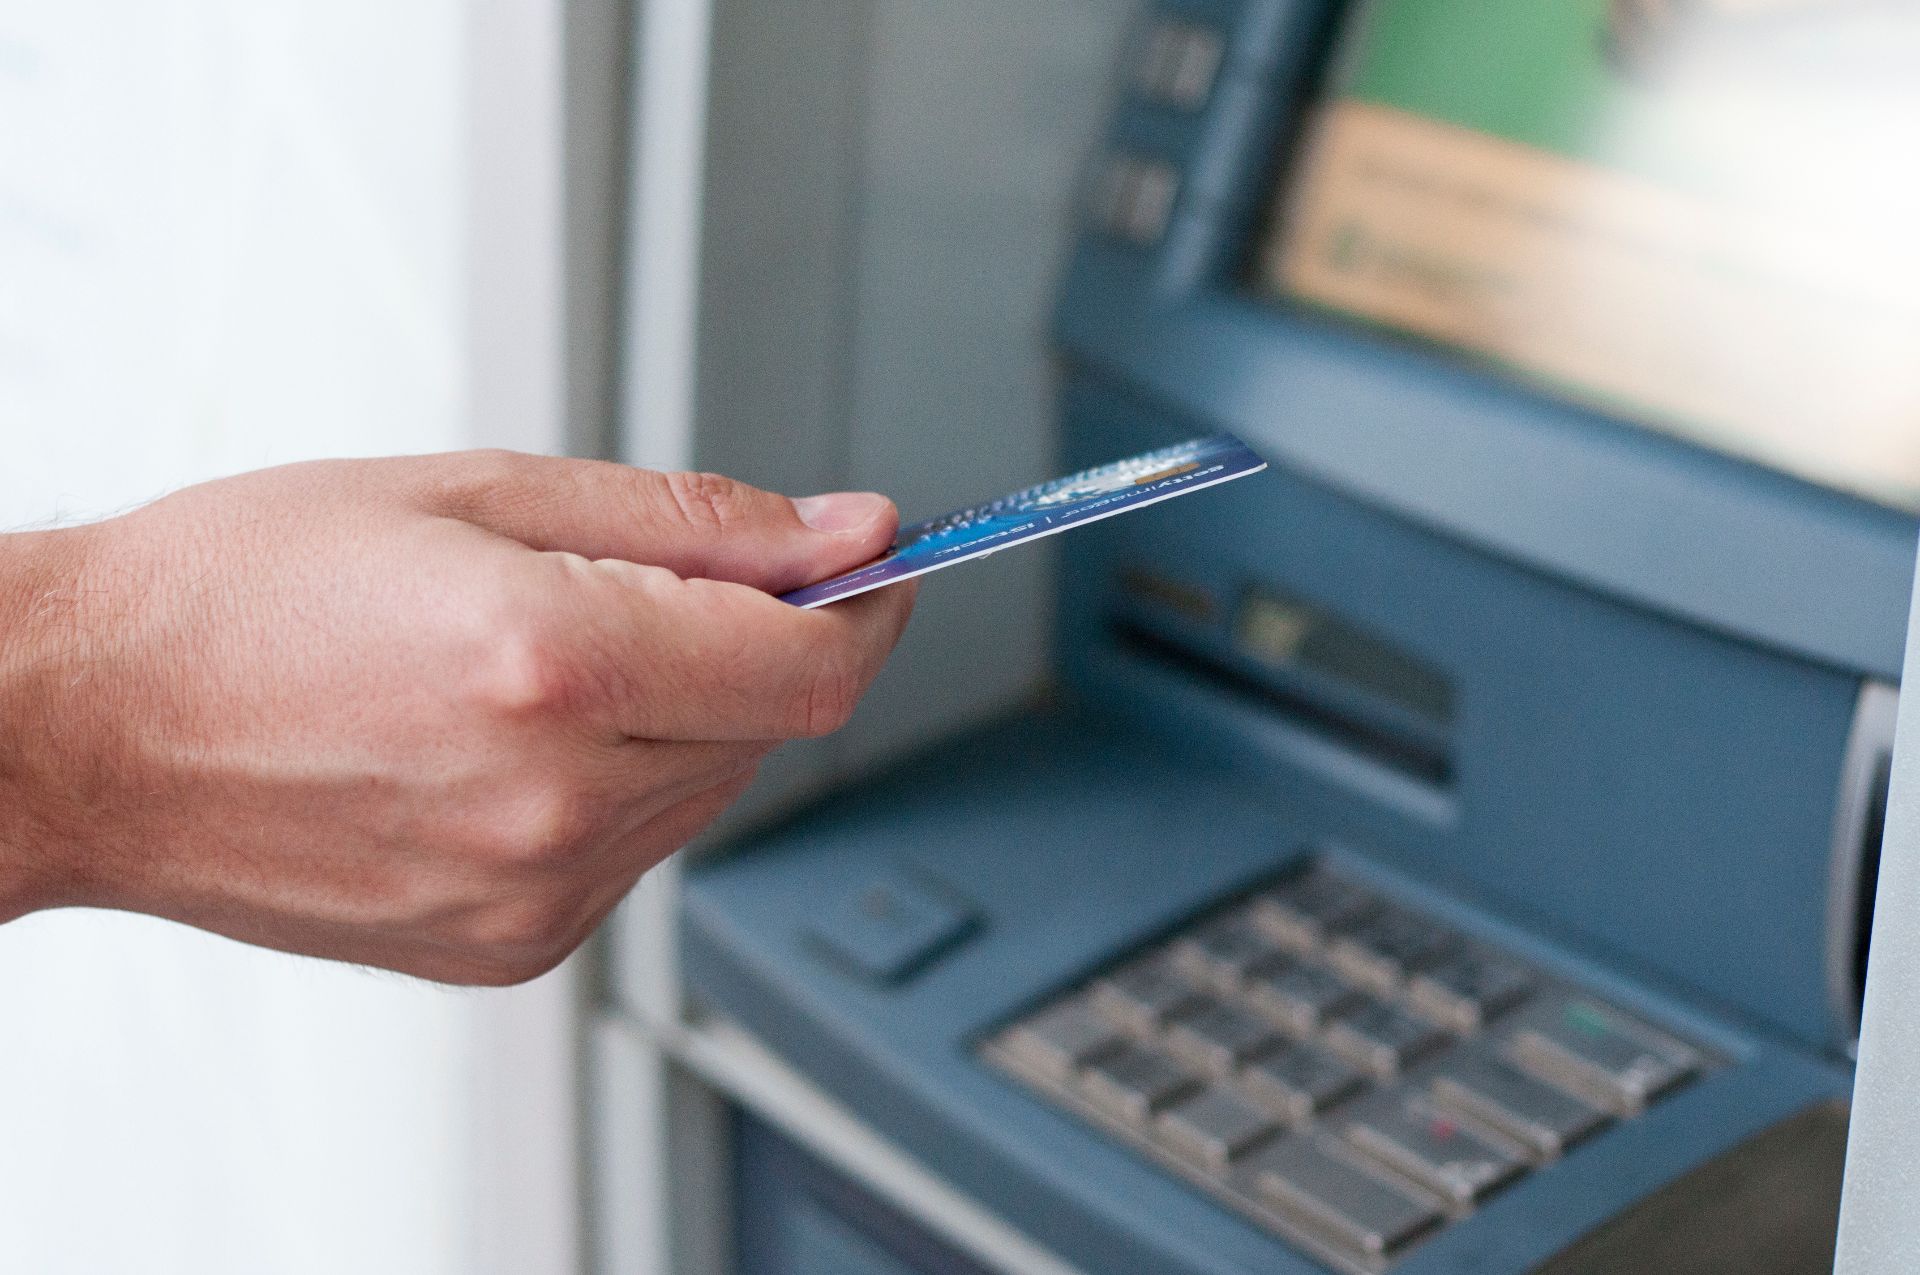 hand-inserting-atm-card-into-bank-machine-withdraw-money-businessman-men-hand-puts-credit-card-into-atm_%281%29